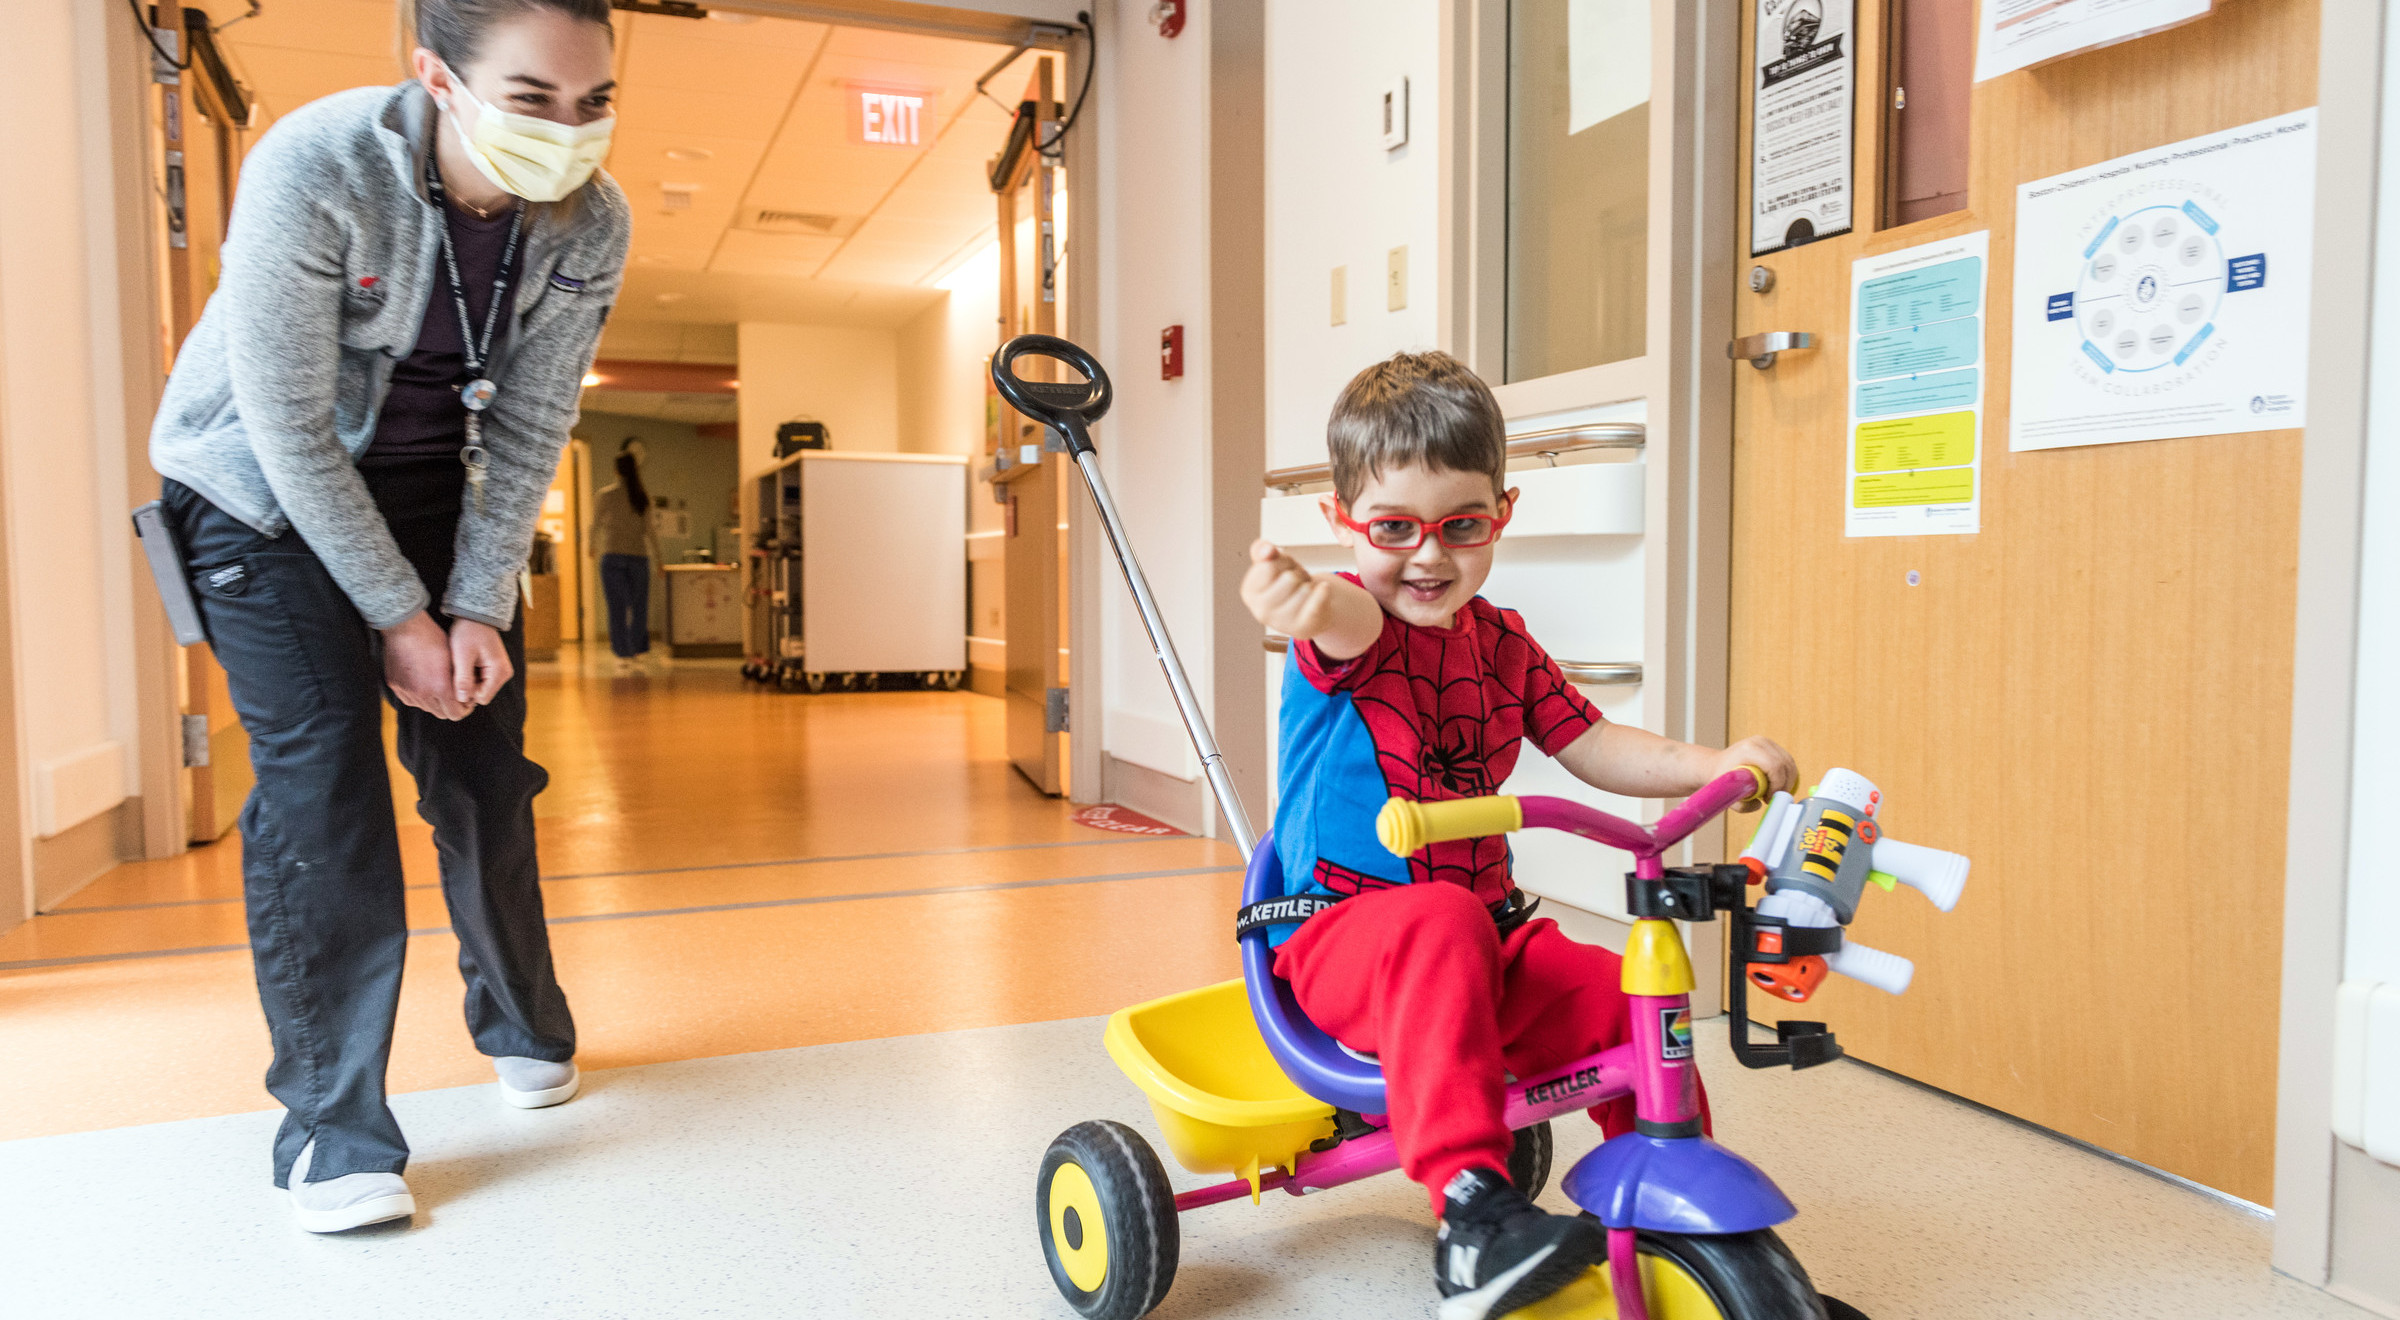 Boy rides tricycle through hallways of medical unit while watched by a clinician.